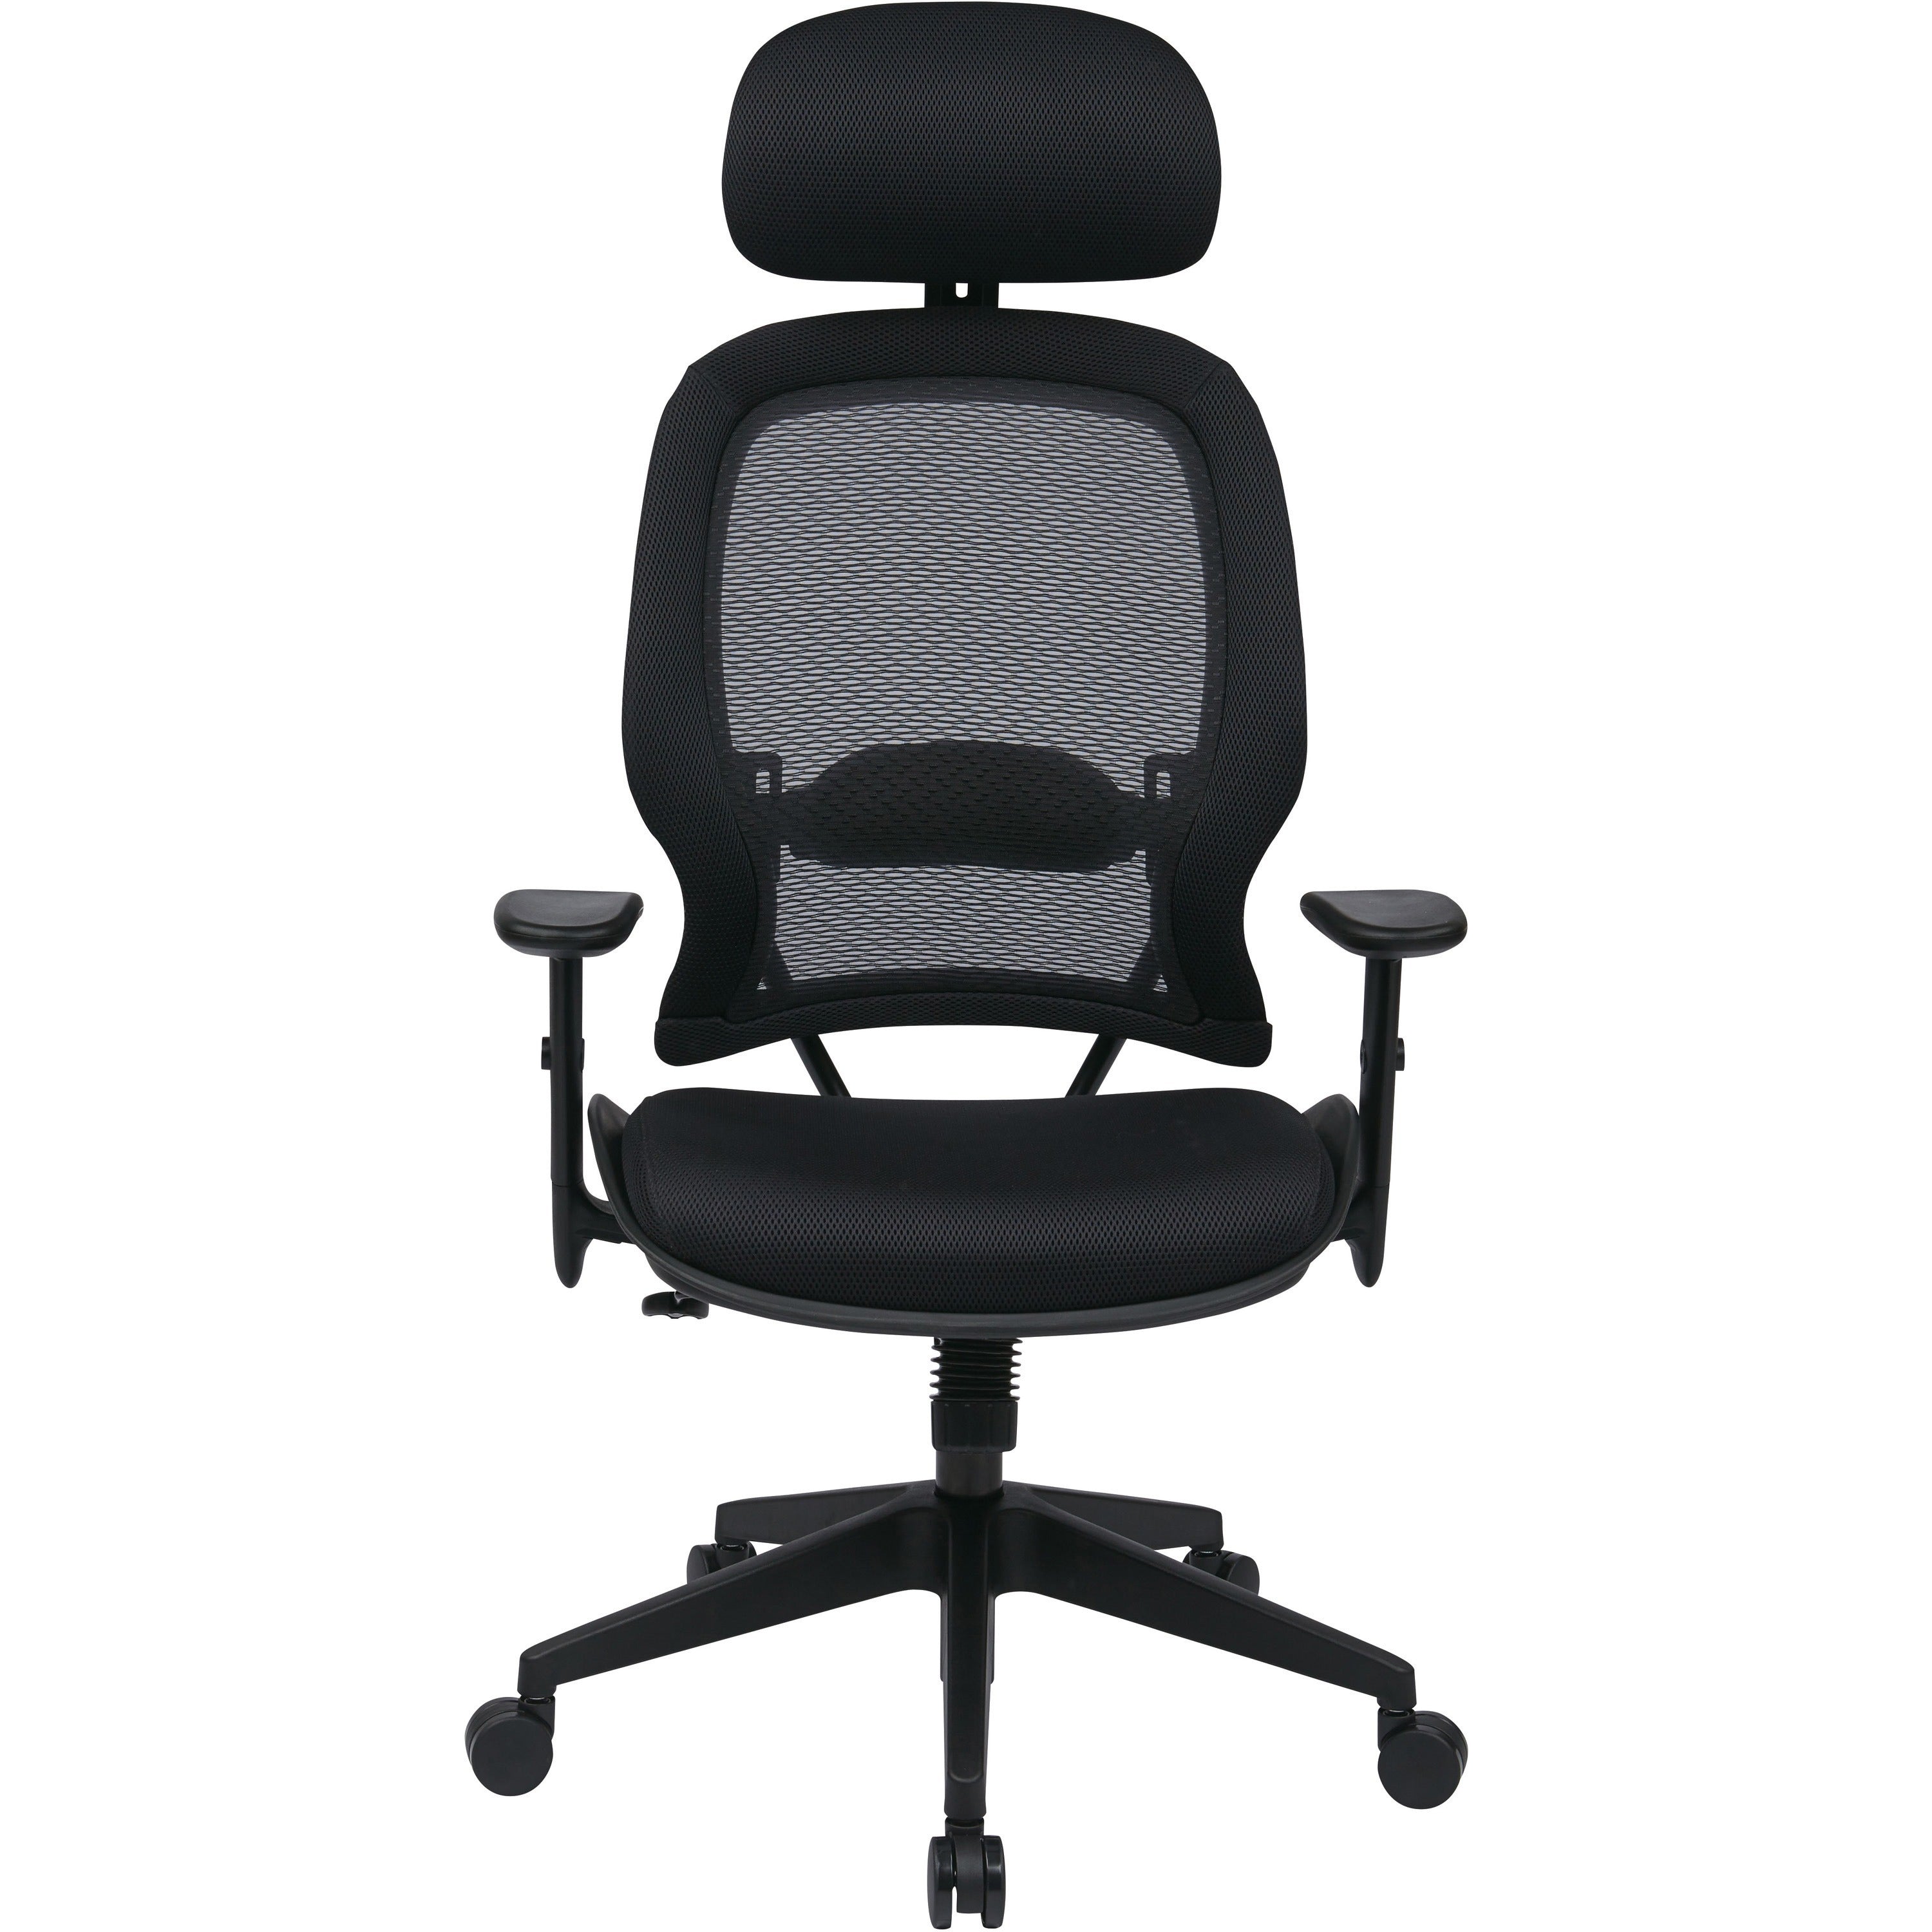 office-star-professional-air-grid-chair-with-adjustable-headrest-mesh-seat-5-star-base-black-1-each_osp55403 - 2